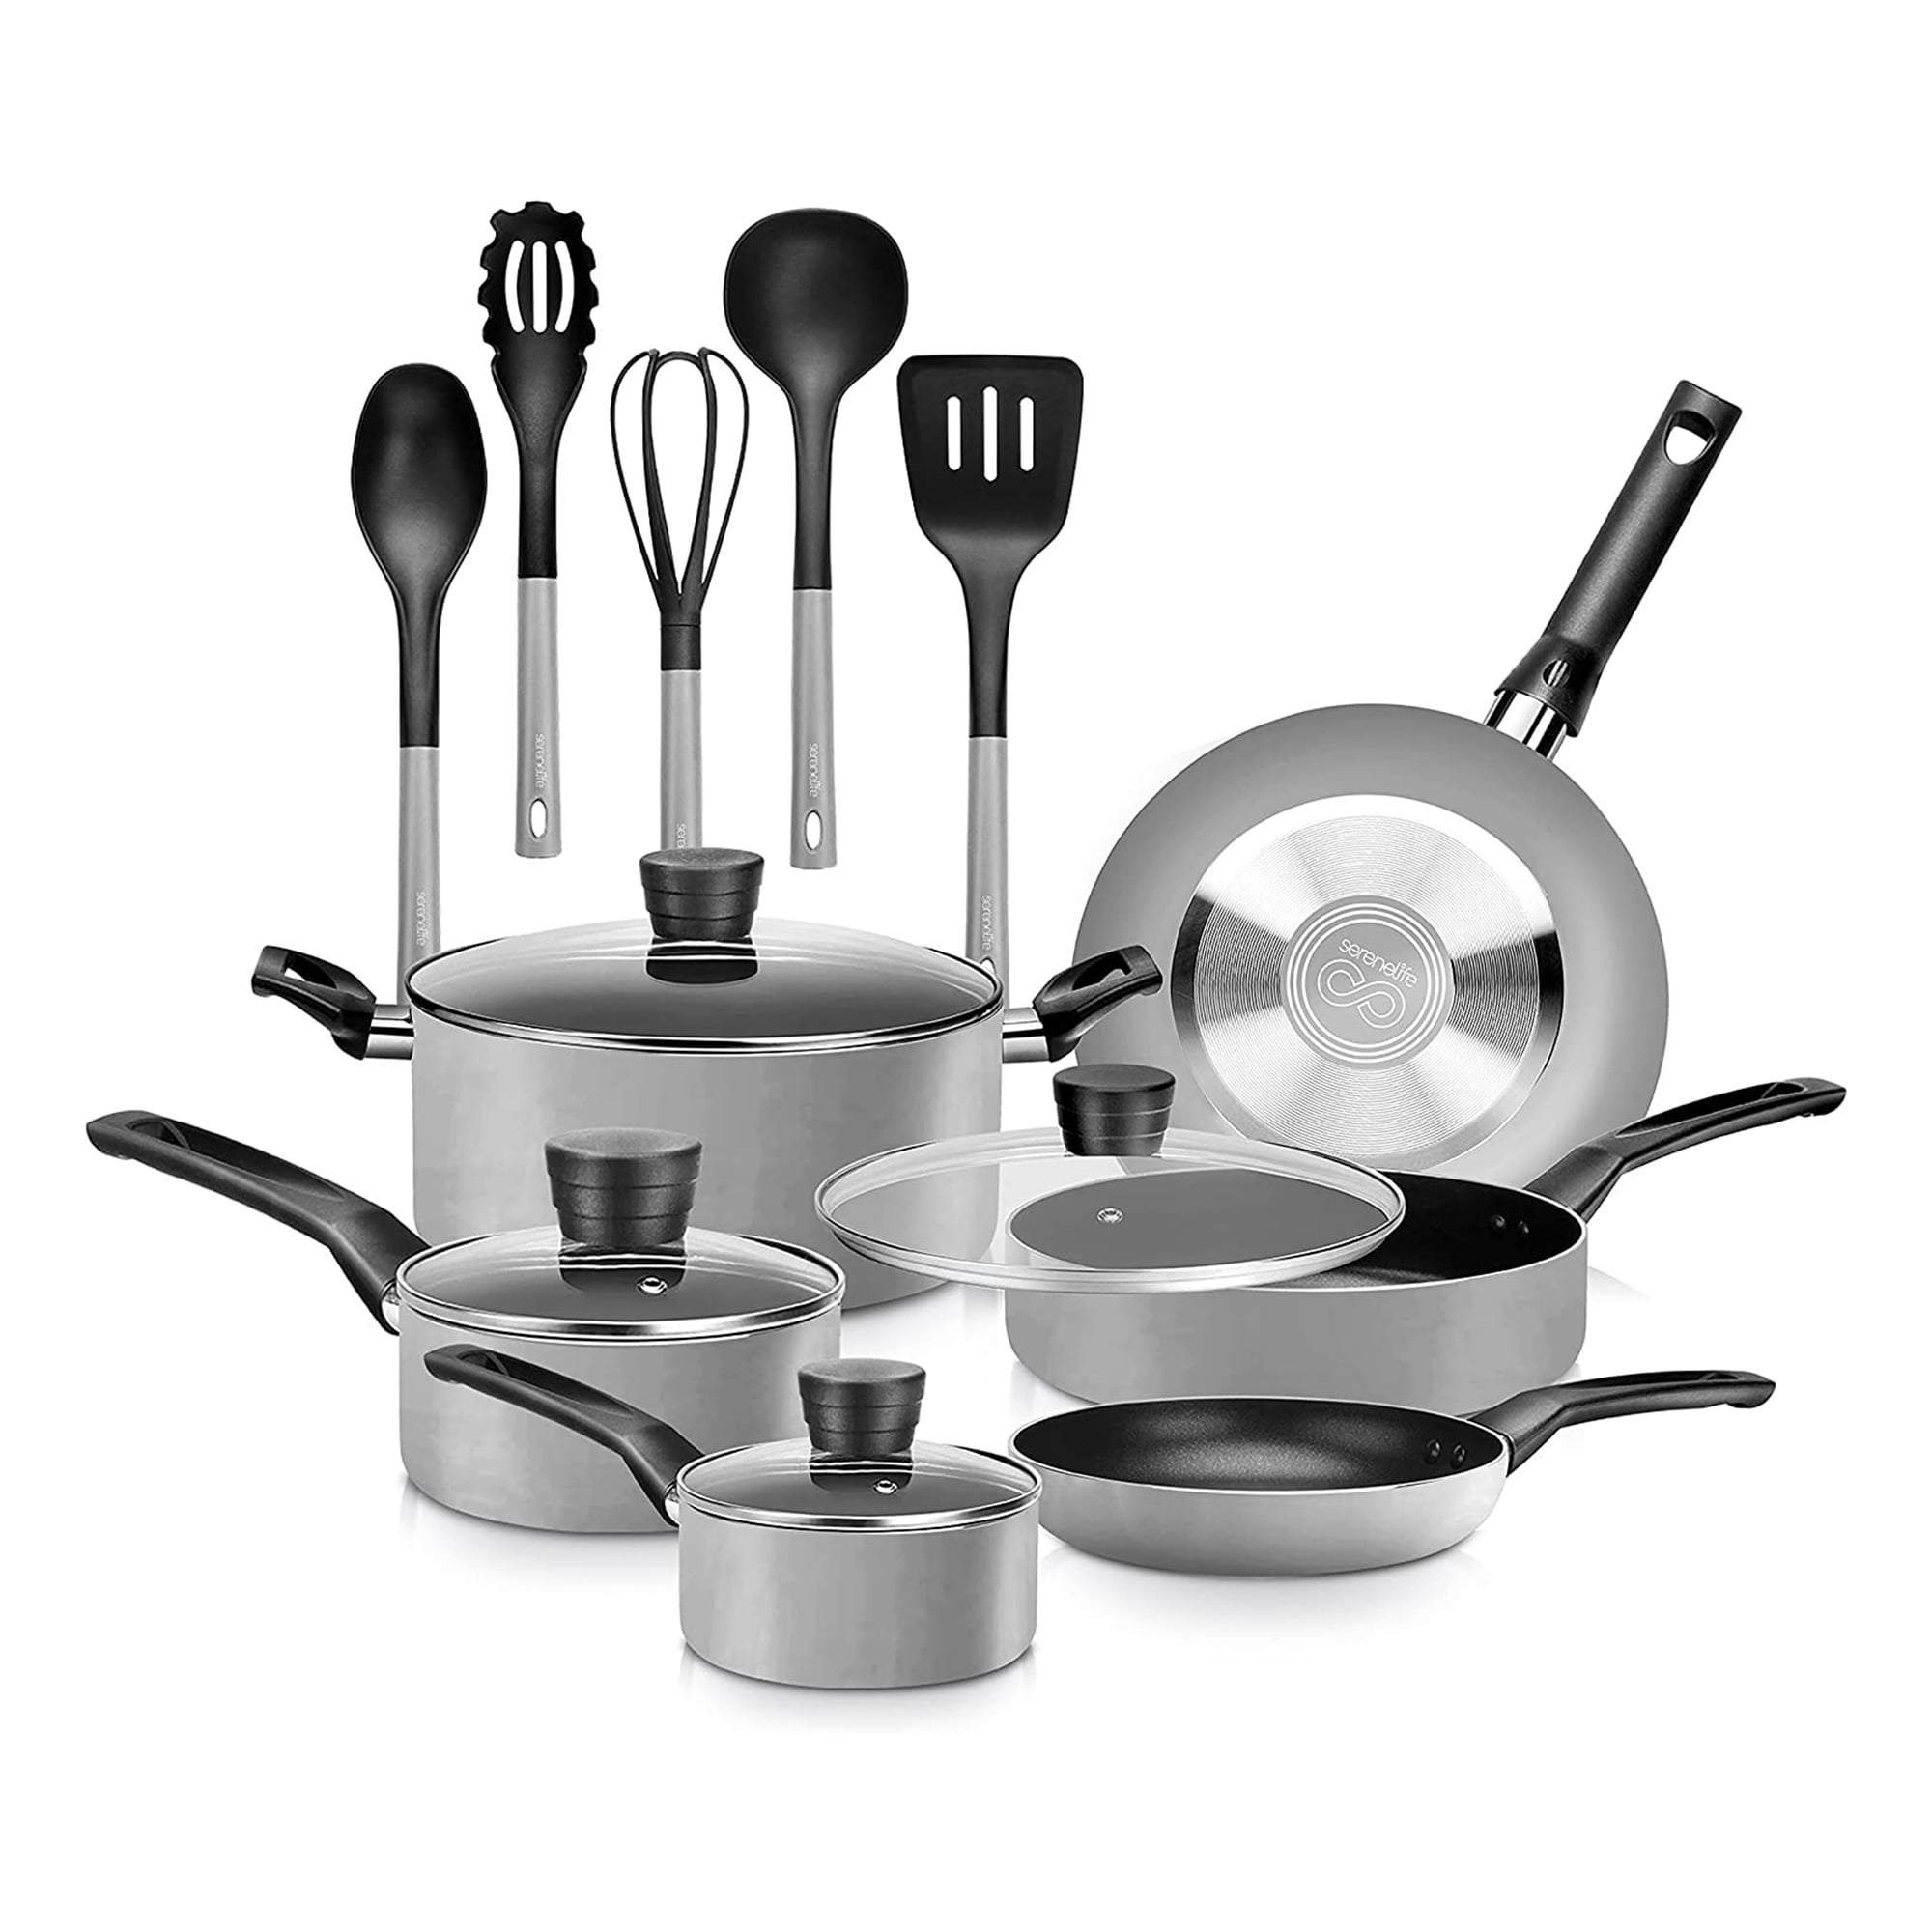 Serenelife 15 Piece Pots and Pans Non Stick Kitchenware Cookware Set, Black